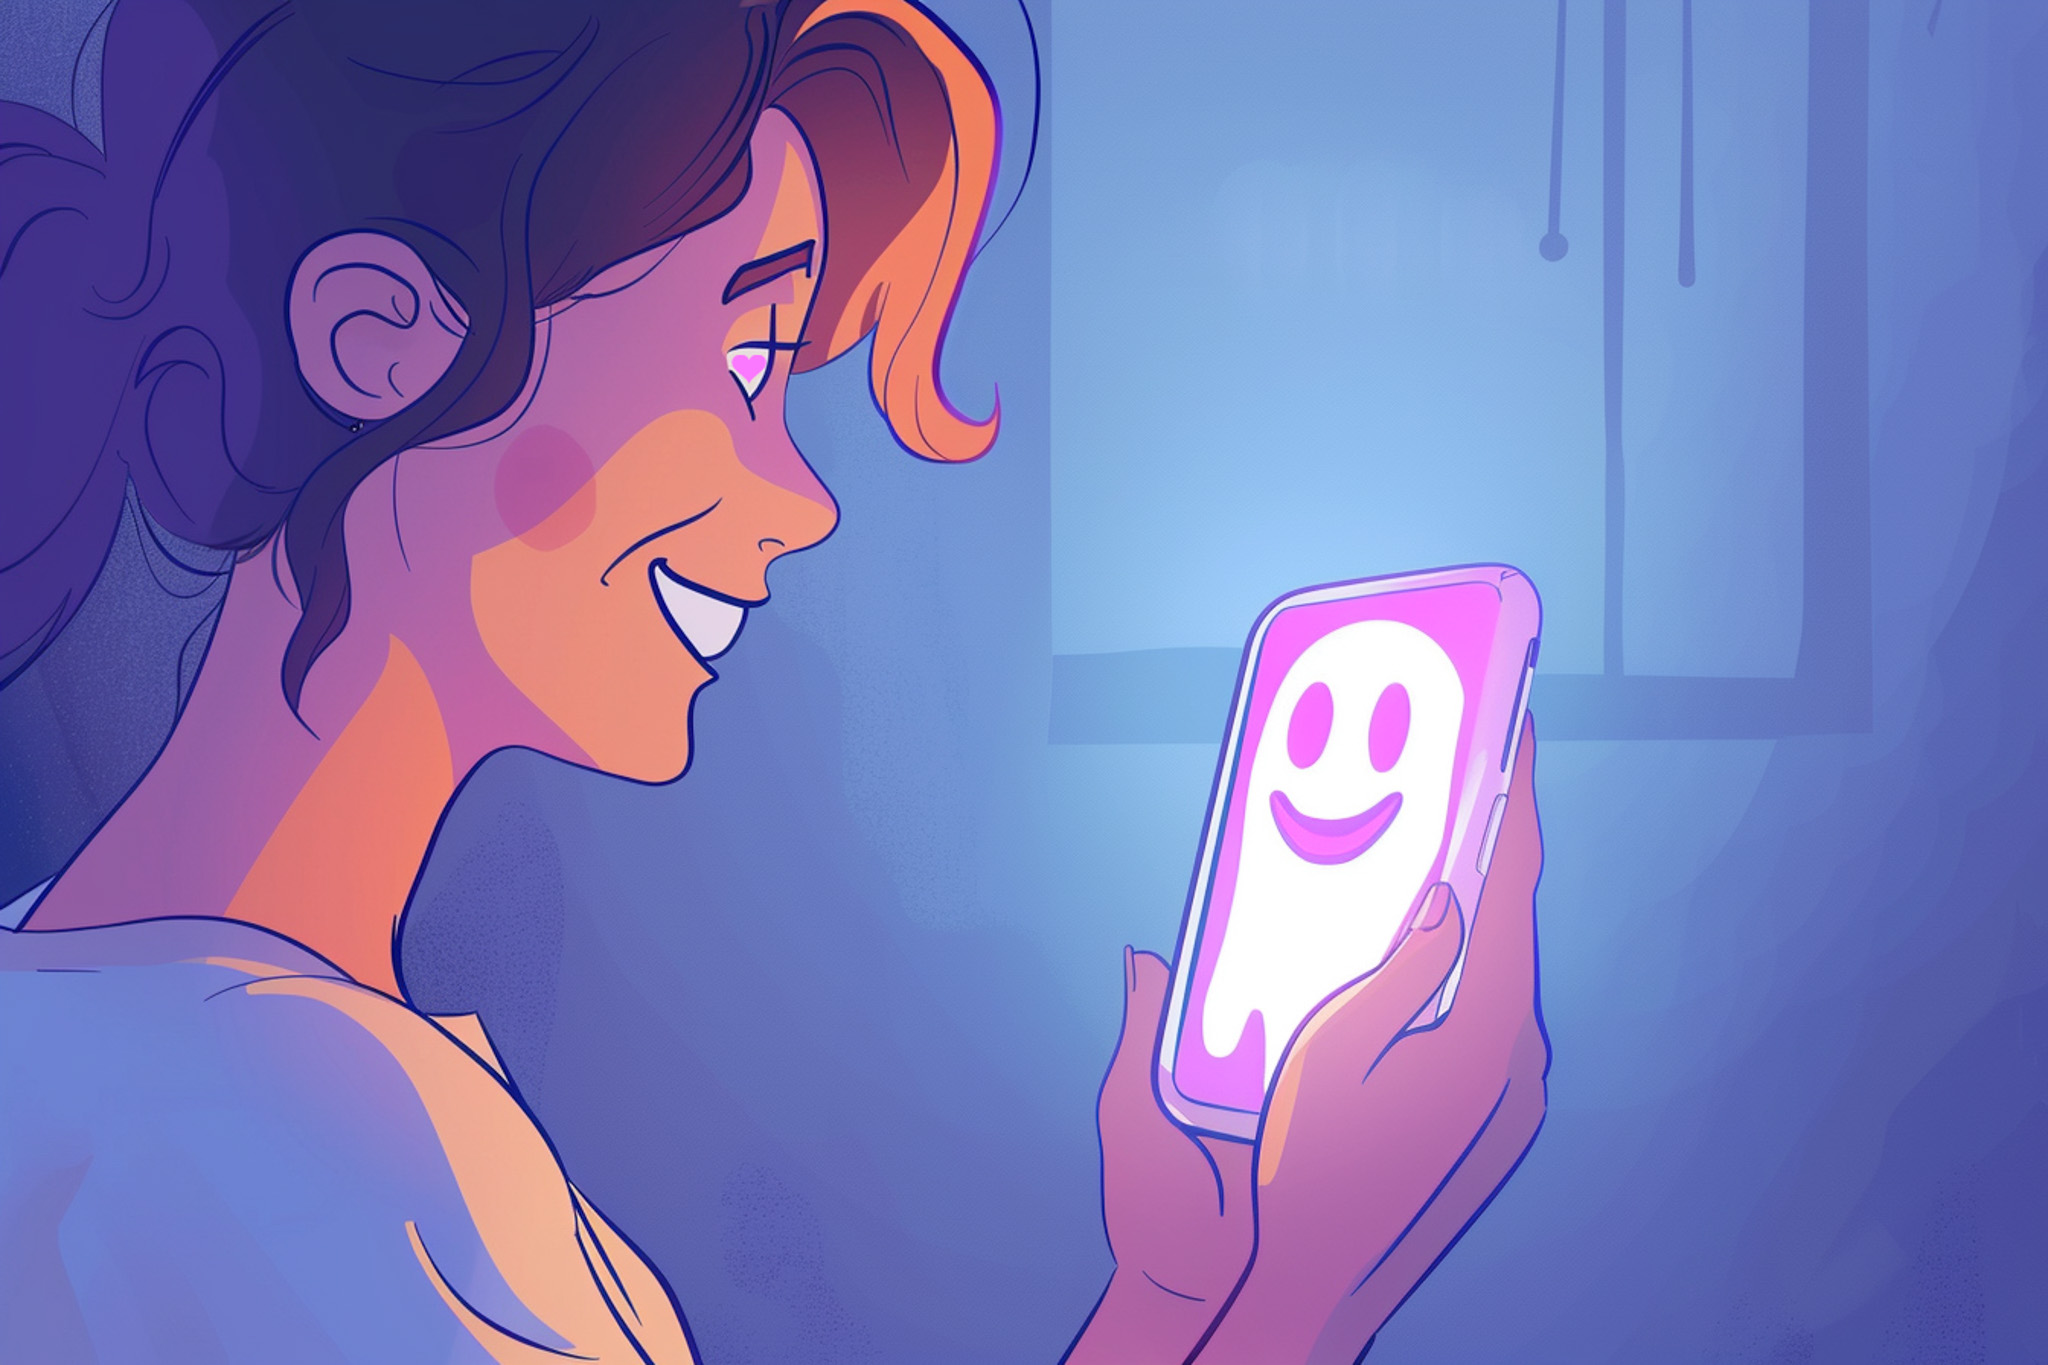 A smiling woman looks at her phone, which displays a smiling ghost emoji, in a dimly lit room.